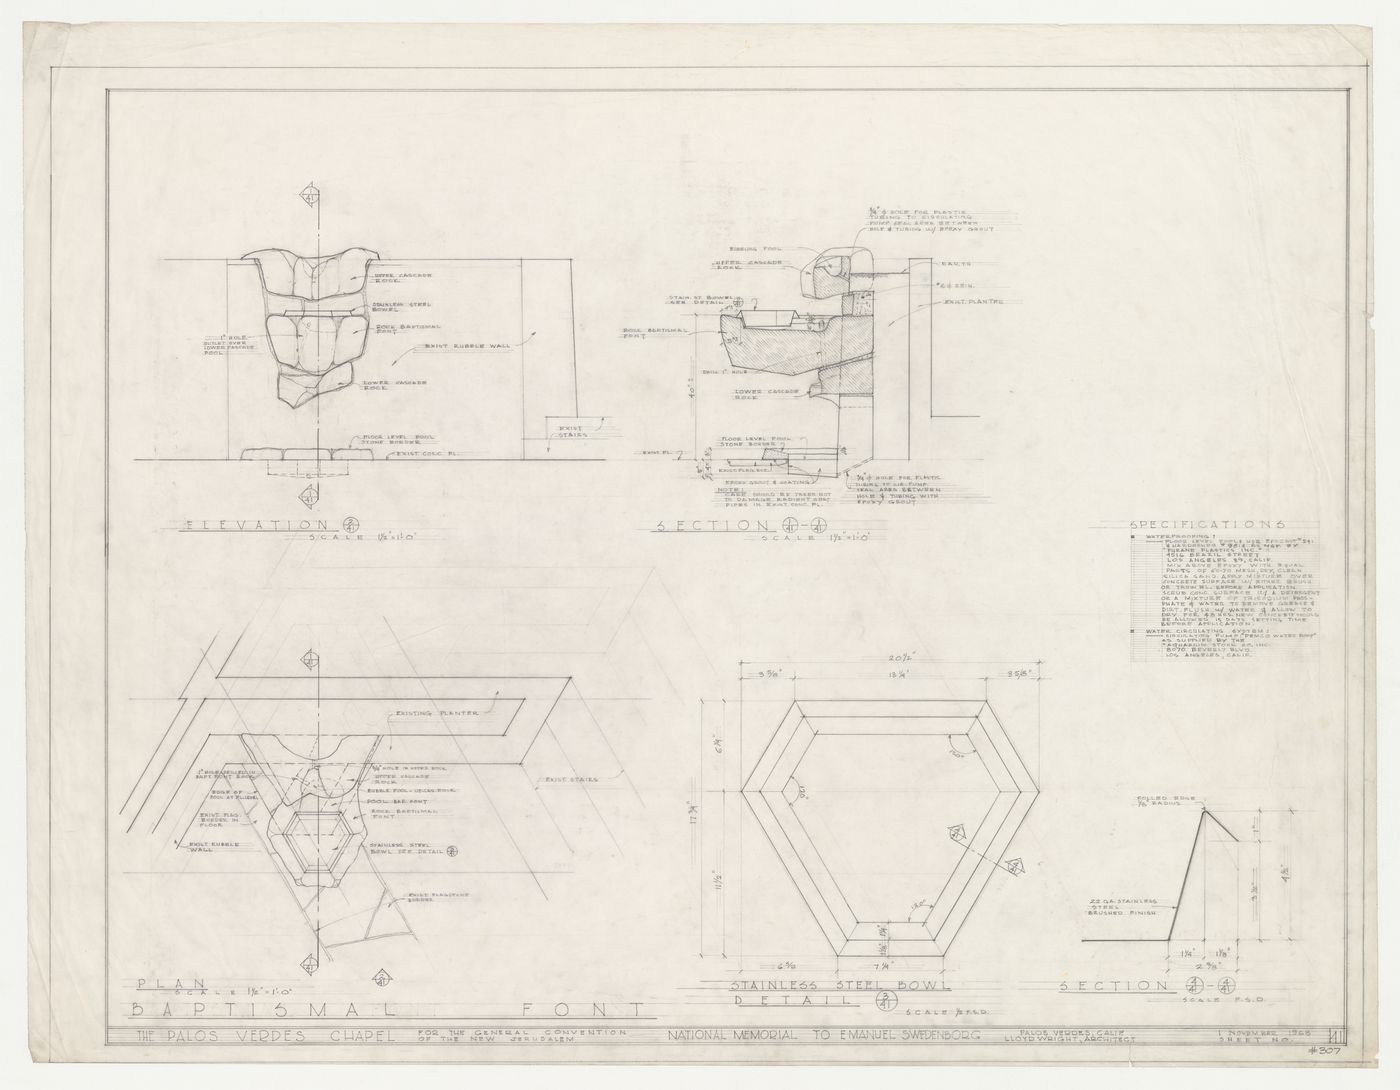 Wayfarers' Chapel, Palos Verdes, California: Plan, elevation and section for the baptismal font, with details for its stainless steel bowl and specifications for the waterproofing and water circulation system